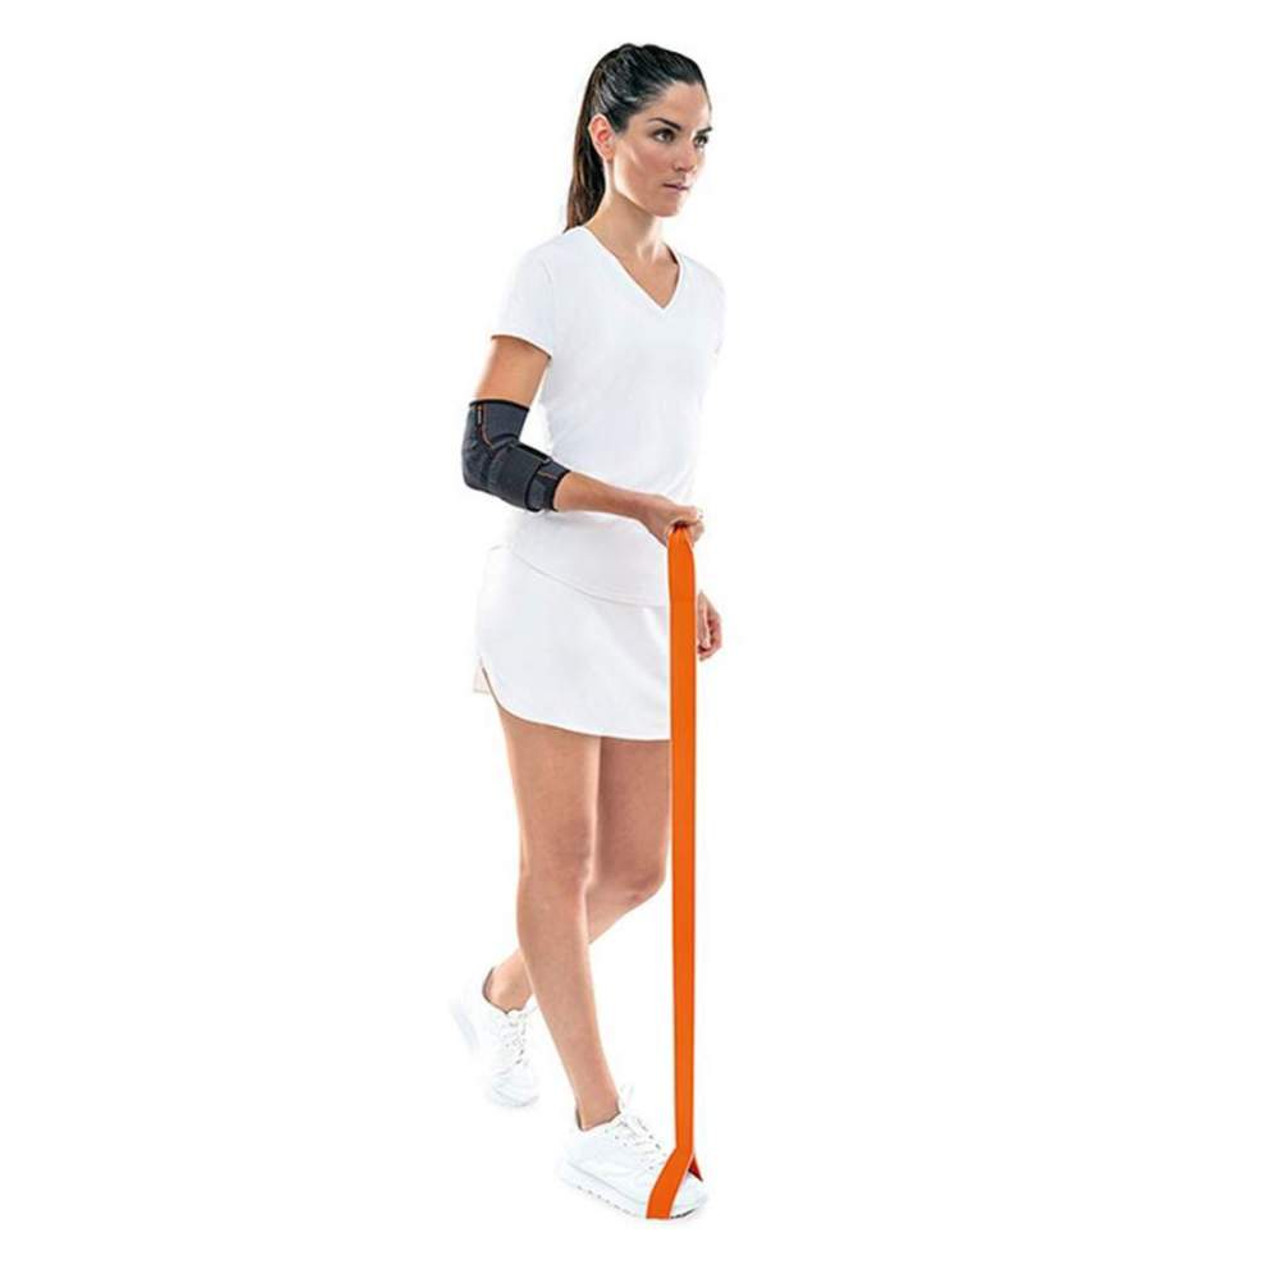 FUNCTIONAL ELASTIC ELBOW SUPPORT - MD/3, TGO340-MD